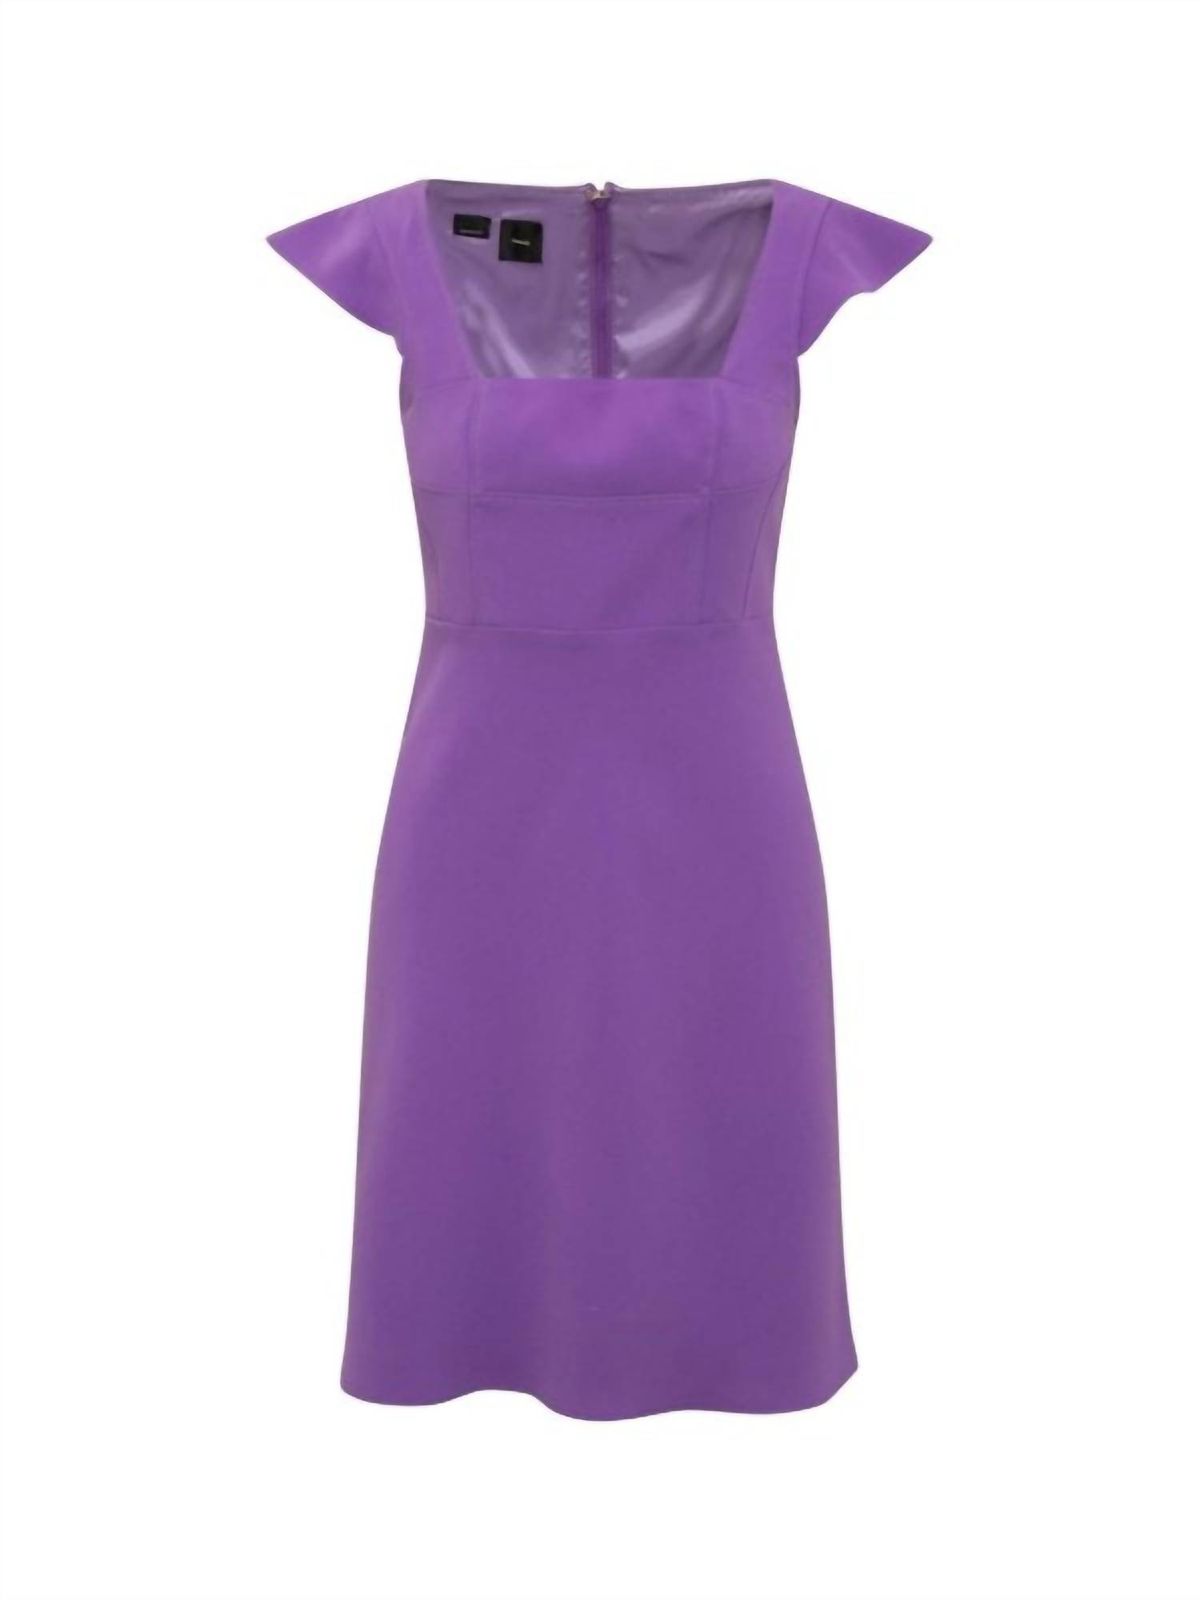 Style 1-2898805424-4465 PINKO Plus Size 17076 Cap Sleeve Purple Cocktail Dress on Queenly